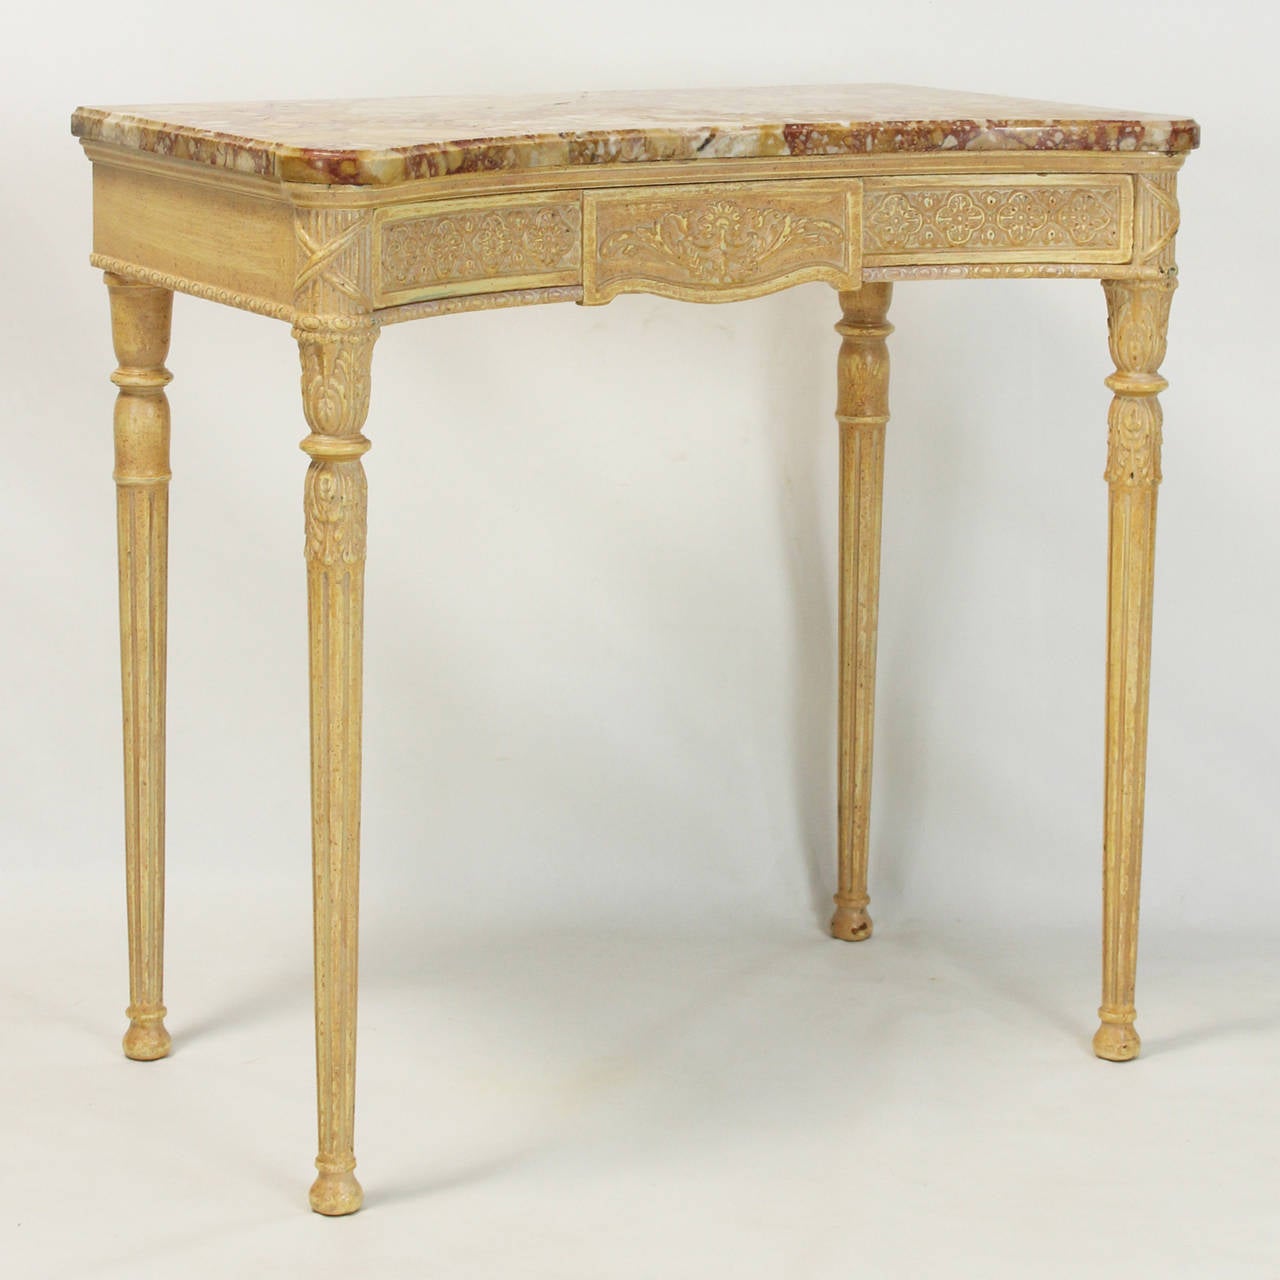 A late 20th century Louis XVI style painted freestanding console table with rose marble top and apron concealed center drawer.